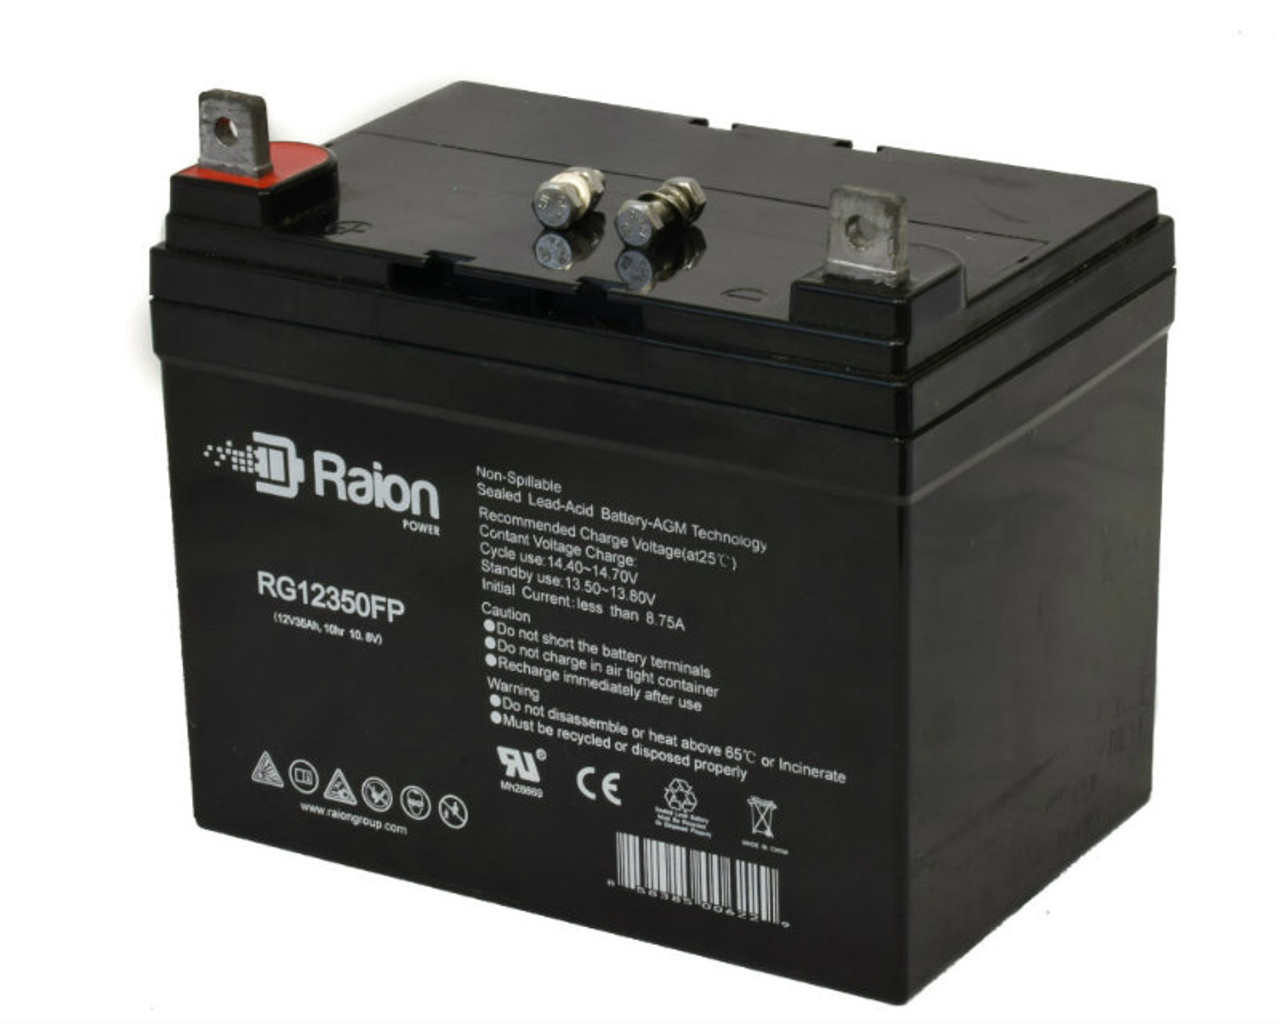 Raion Power Replacement 12V 35Ah RG12350FP Battery for Ariens/Gravely EZR 1540